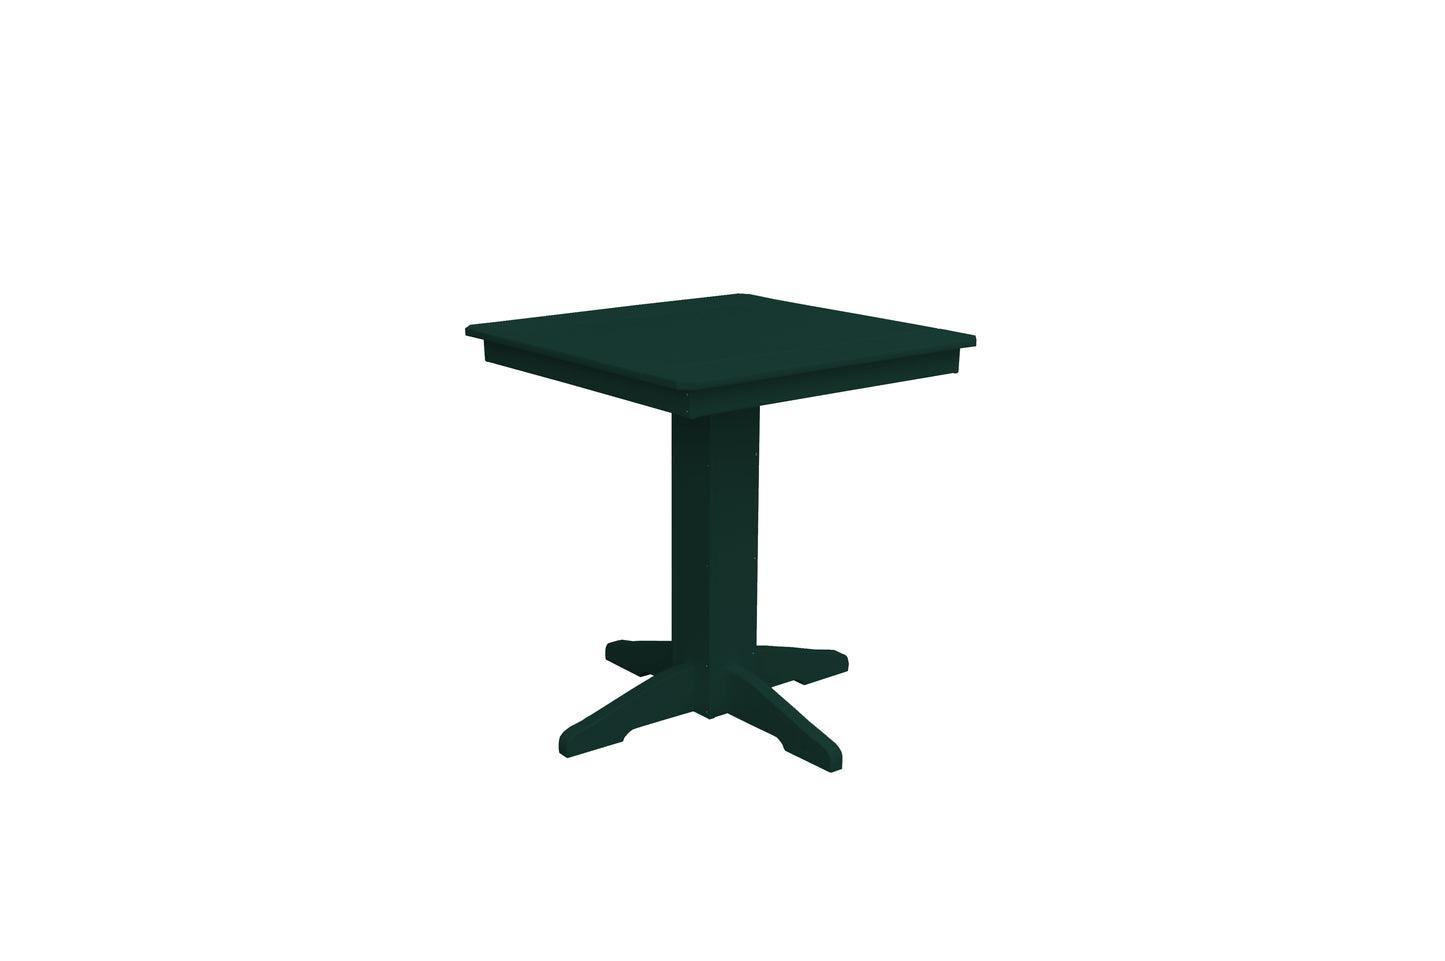 A&L Furniture Co. Recycled Plastic 33" Square Balcony Table (COUNTER HEIGHT)  - LEAD TIME TO SHIP 10 BUSINESS DAYS